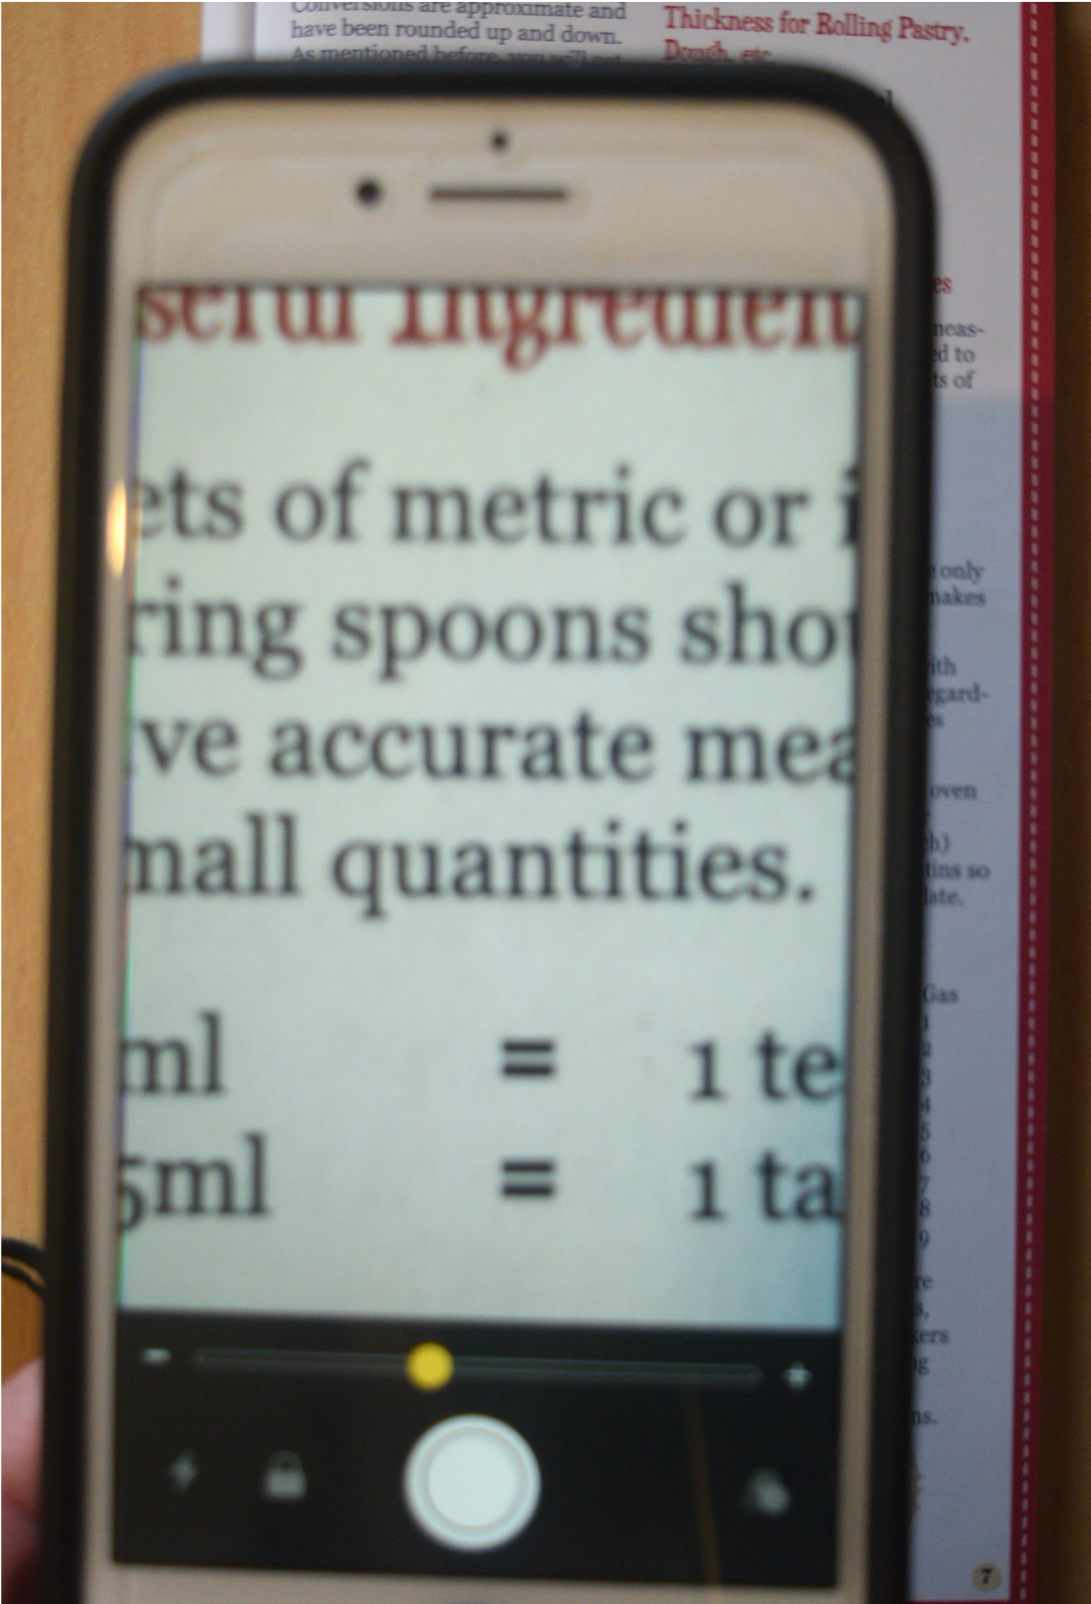 Magnifier on iOS - after